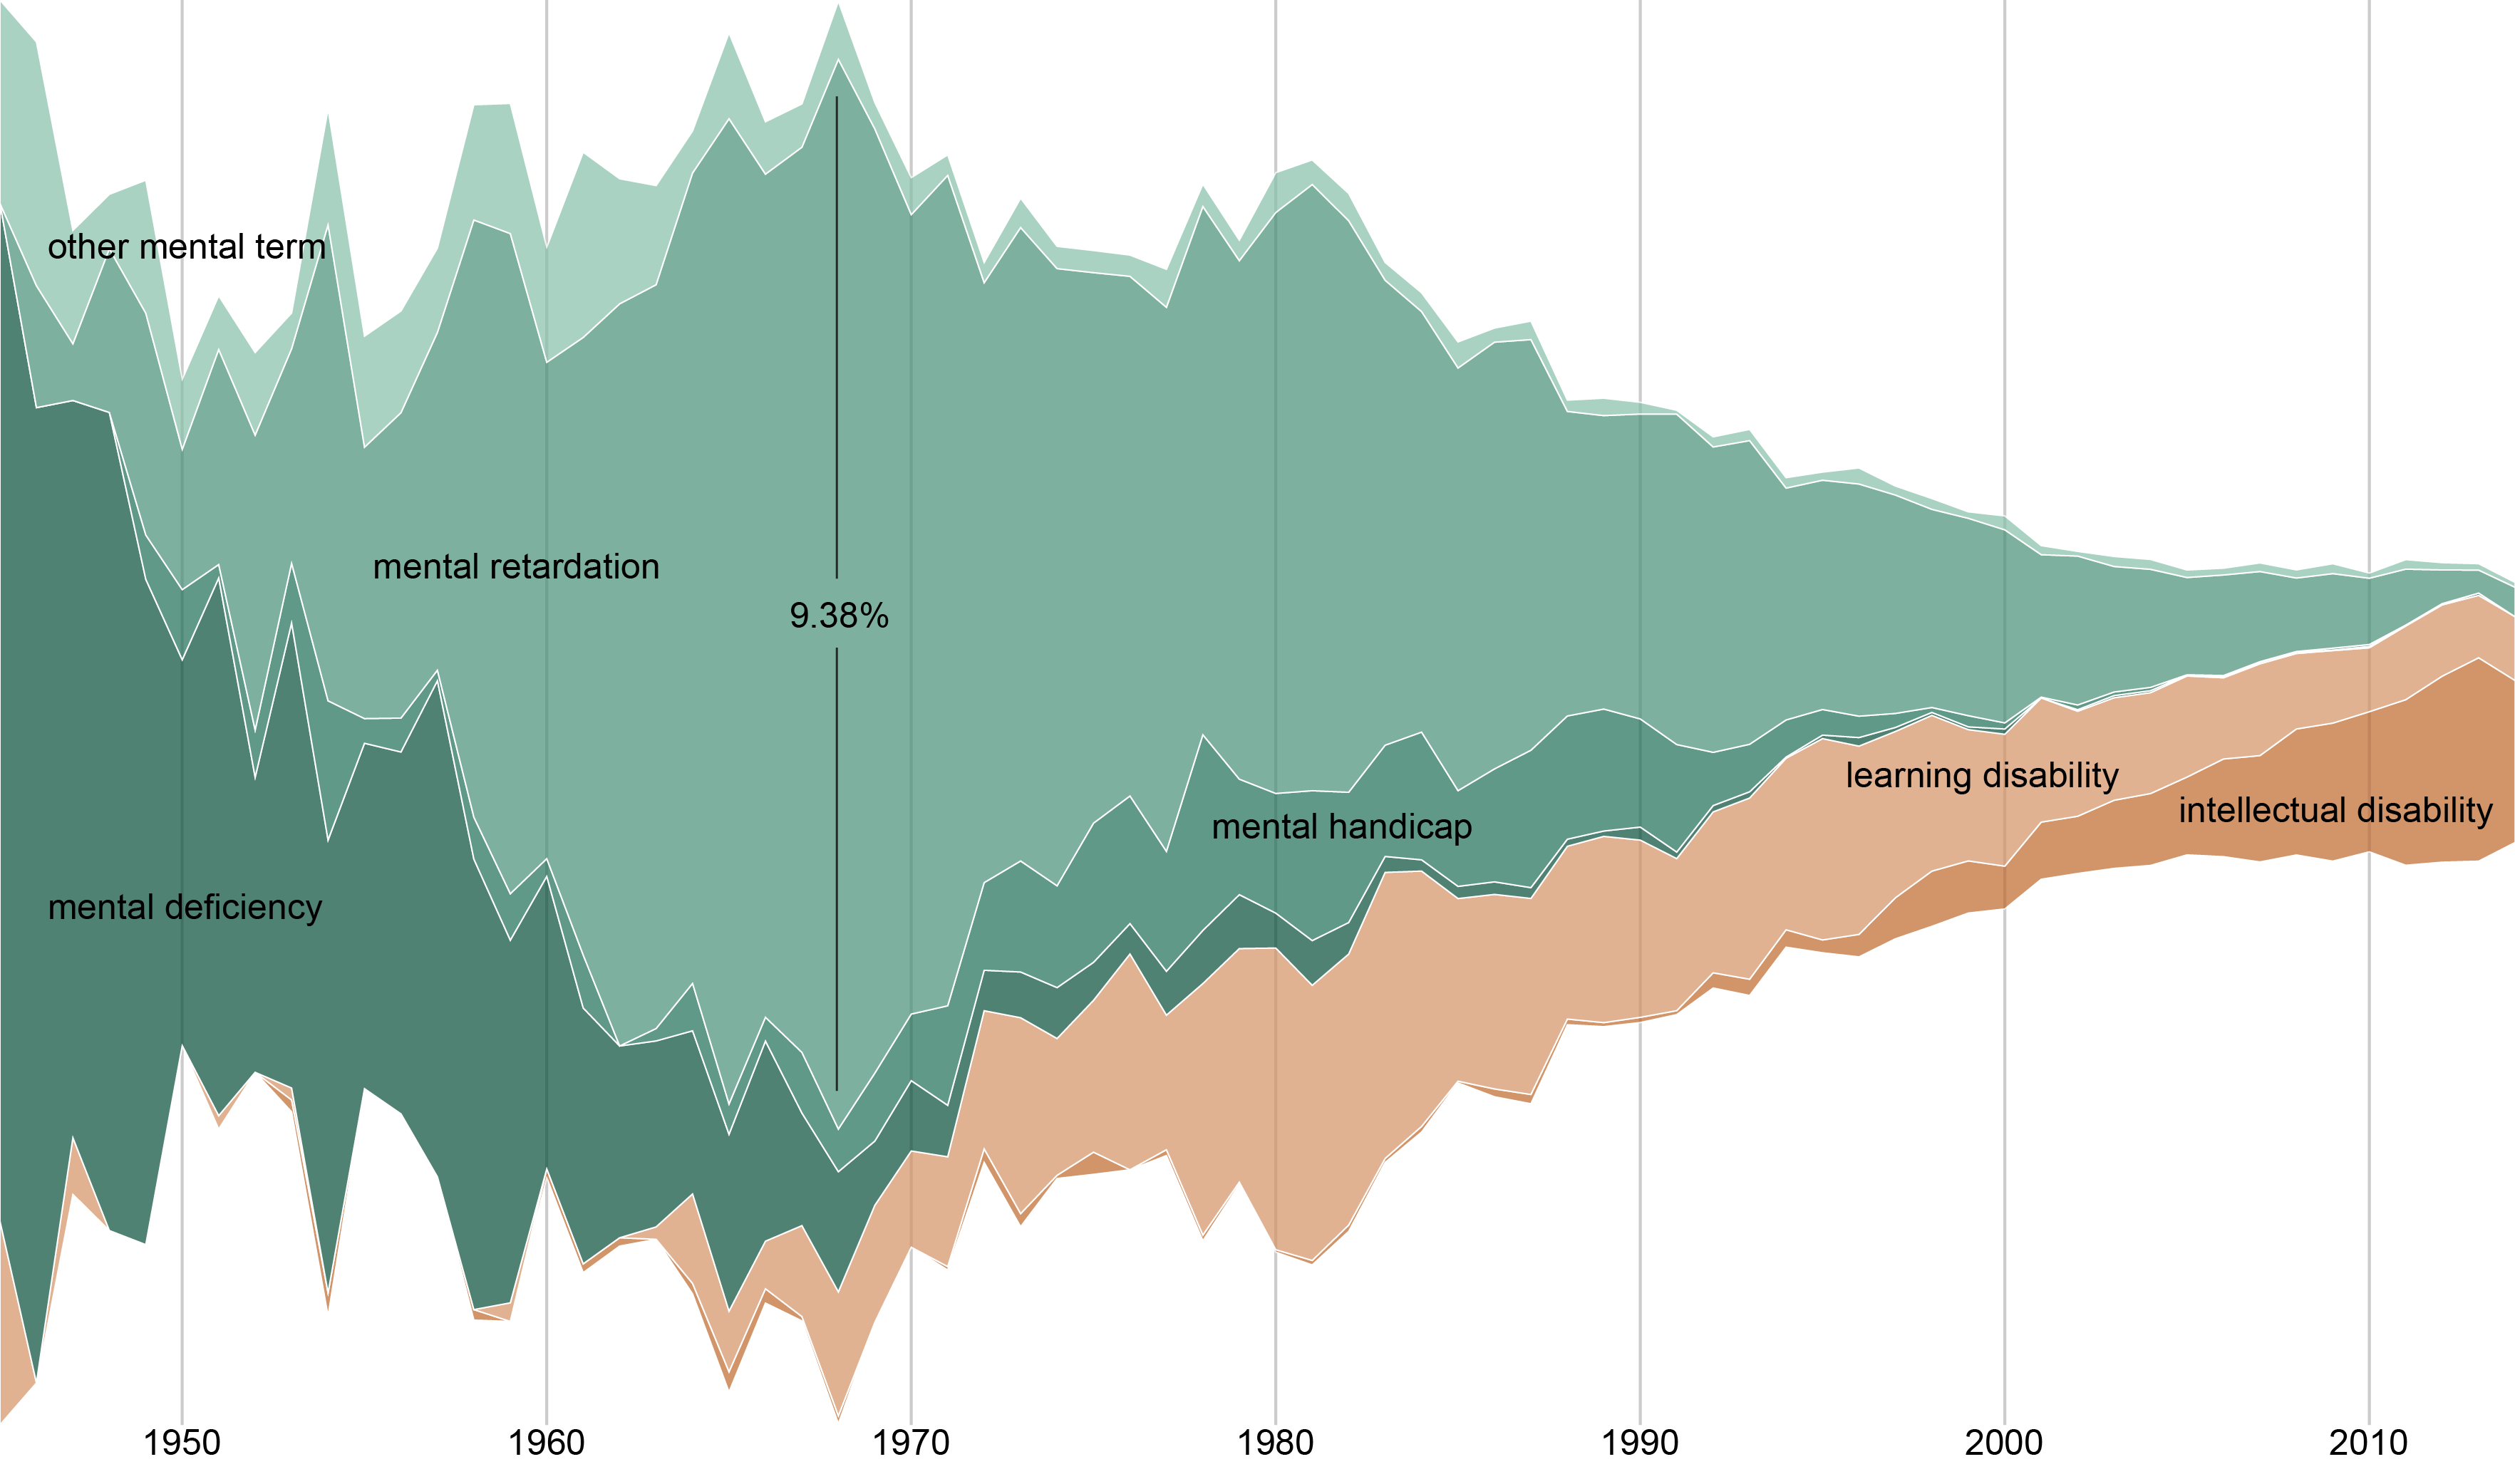 A streamgraph showing the growth and decline of different terms related to mental disorders over time.